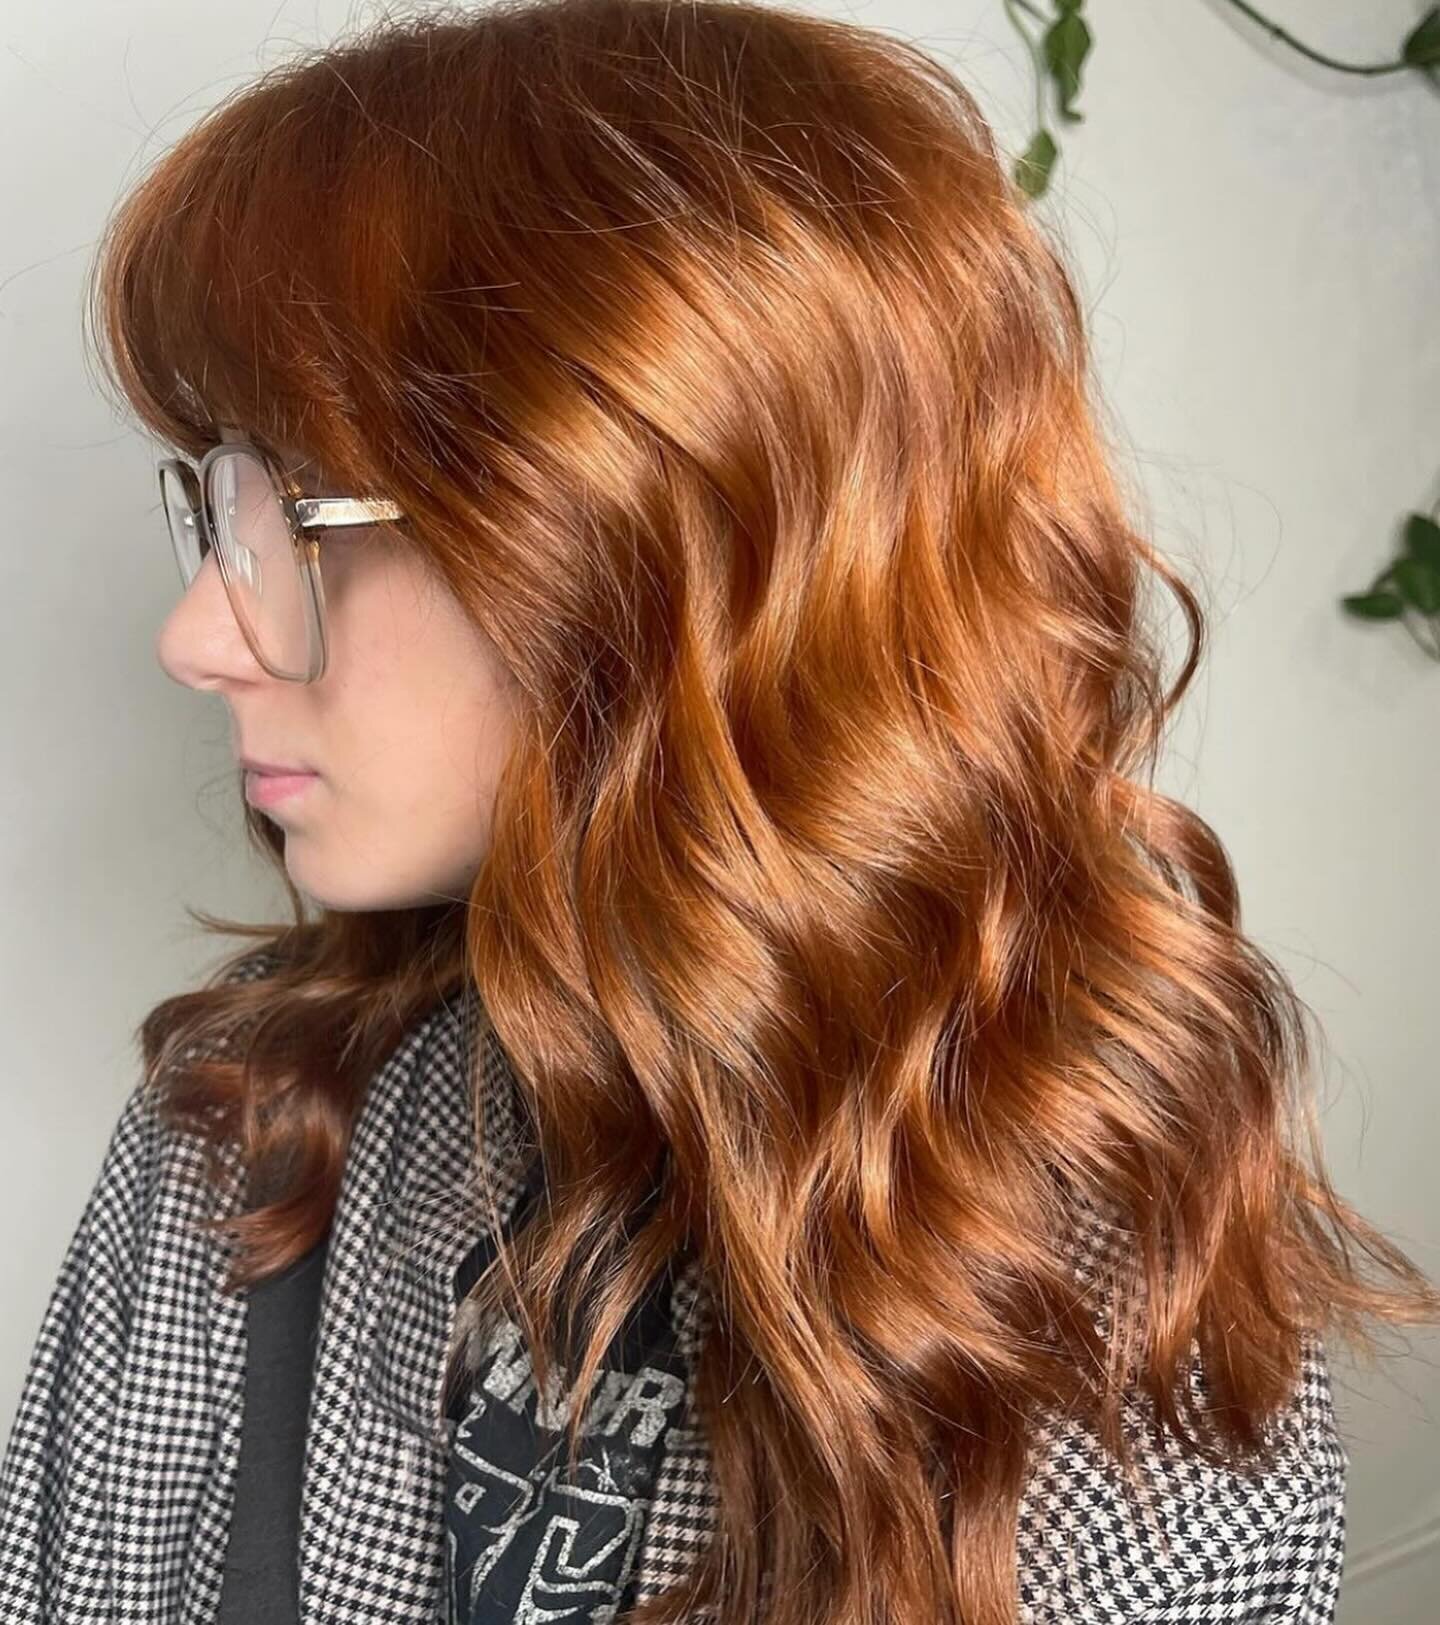 The copper of your dreams by @cutthecrapwith_rye 🧡

Are you in need of a color appointment? This month only we are giving away a free treatment with every color appointment. You get to pick which kind: 

Conditioning treatment 

Shine treatment

Sca